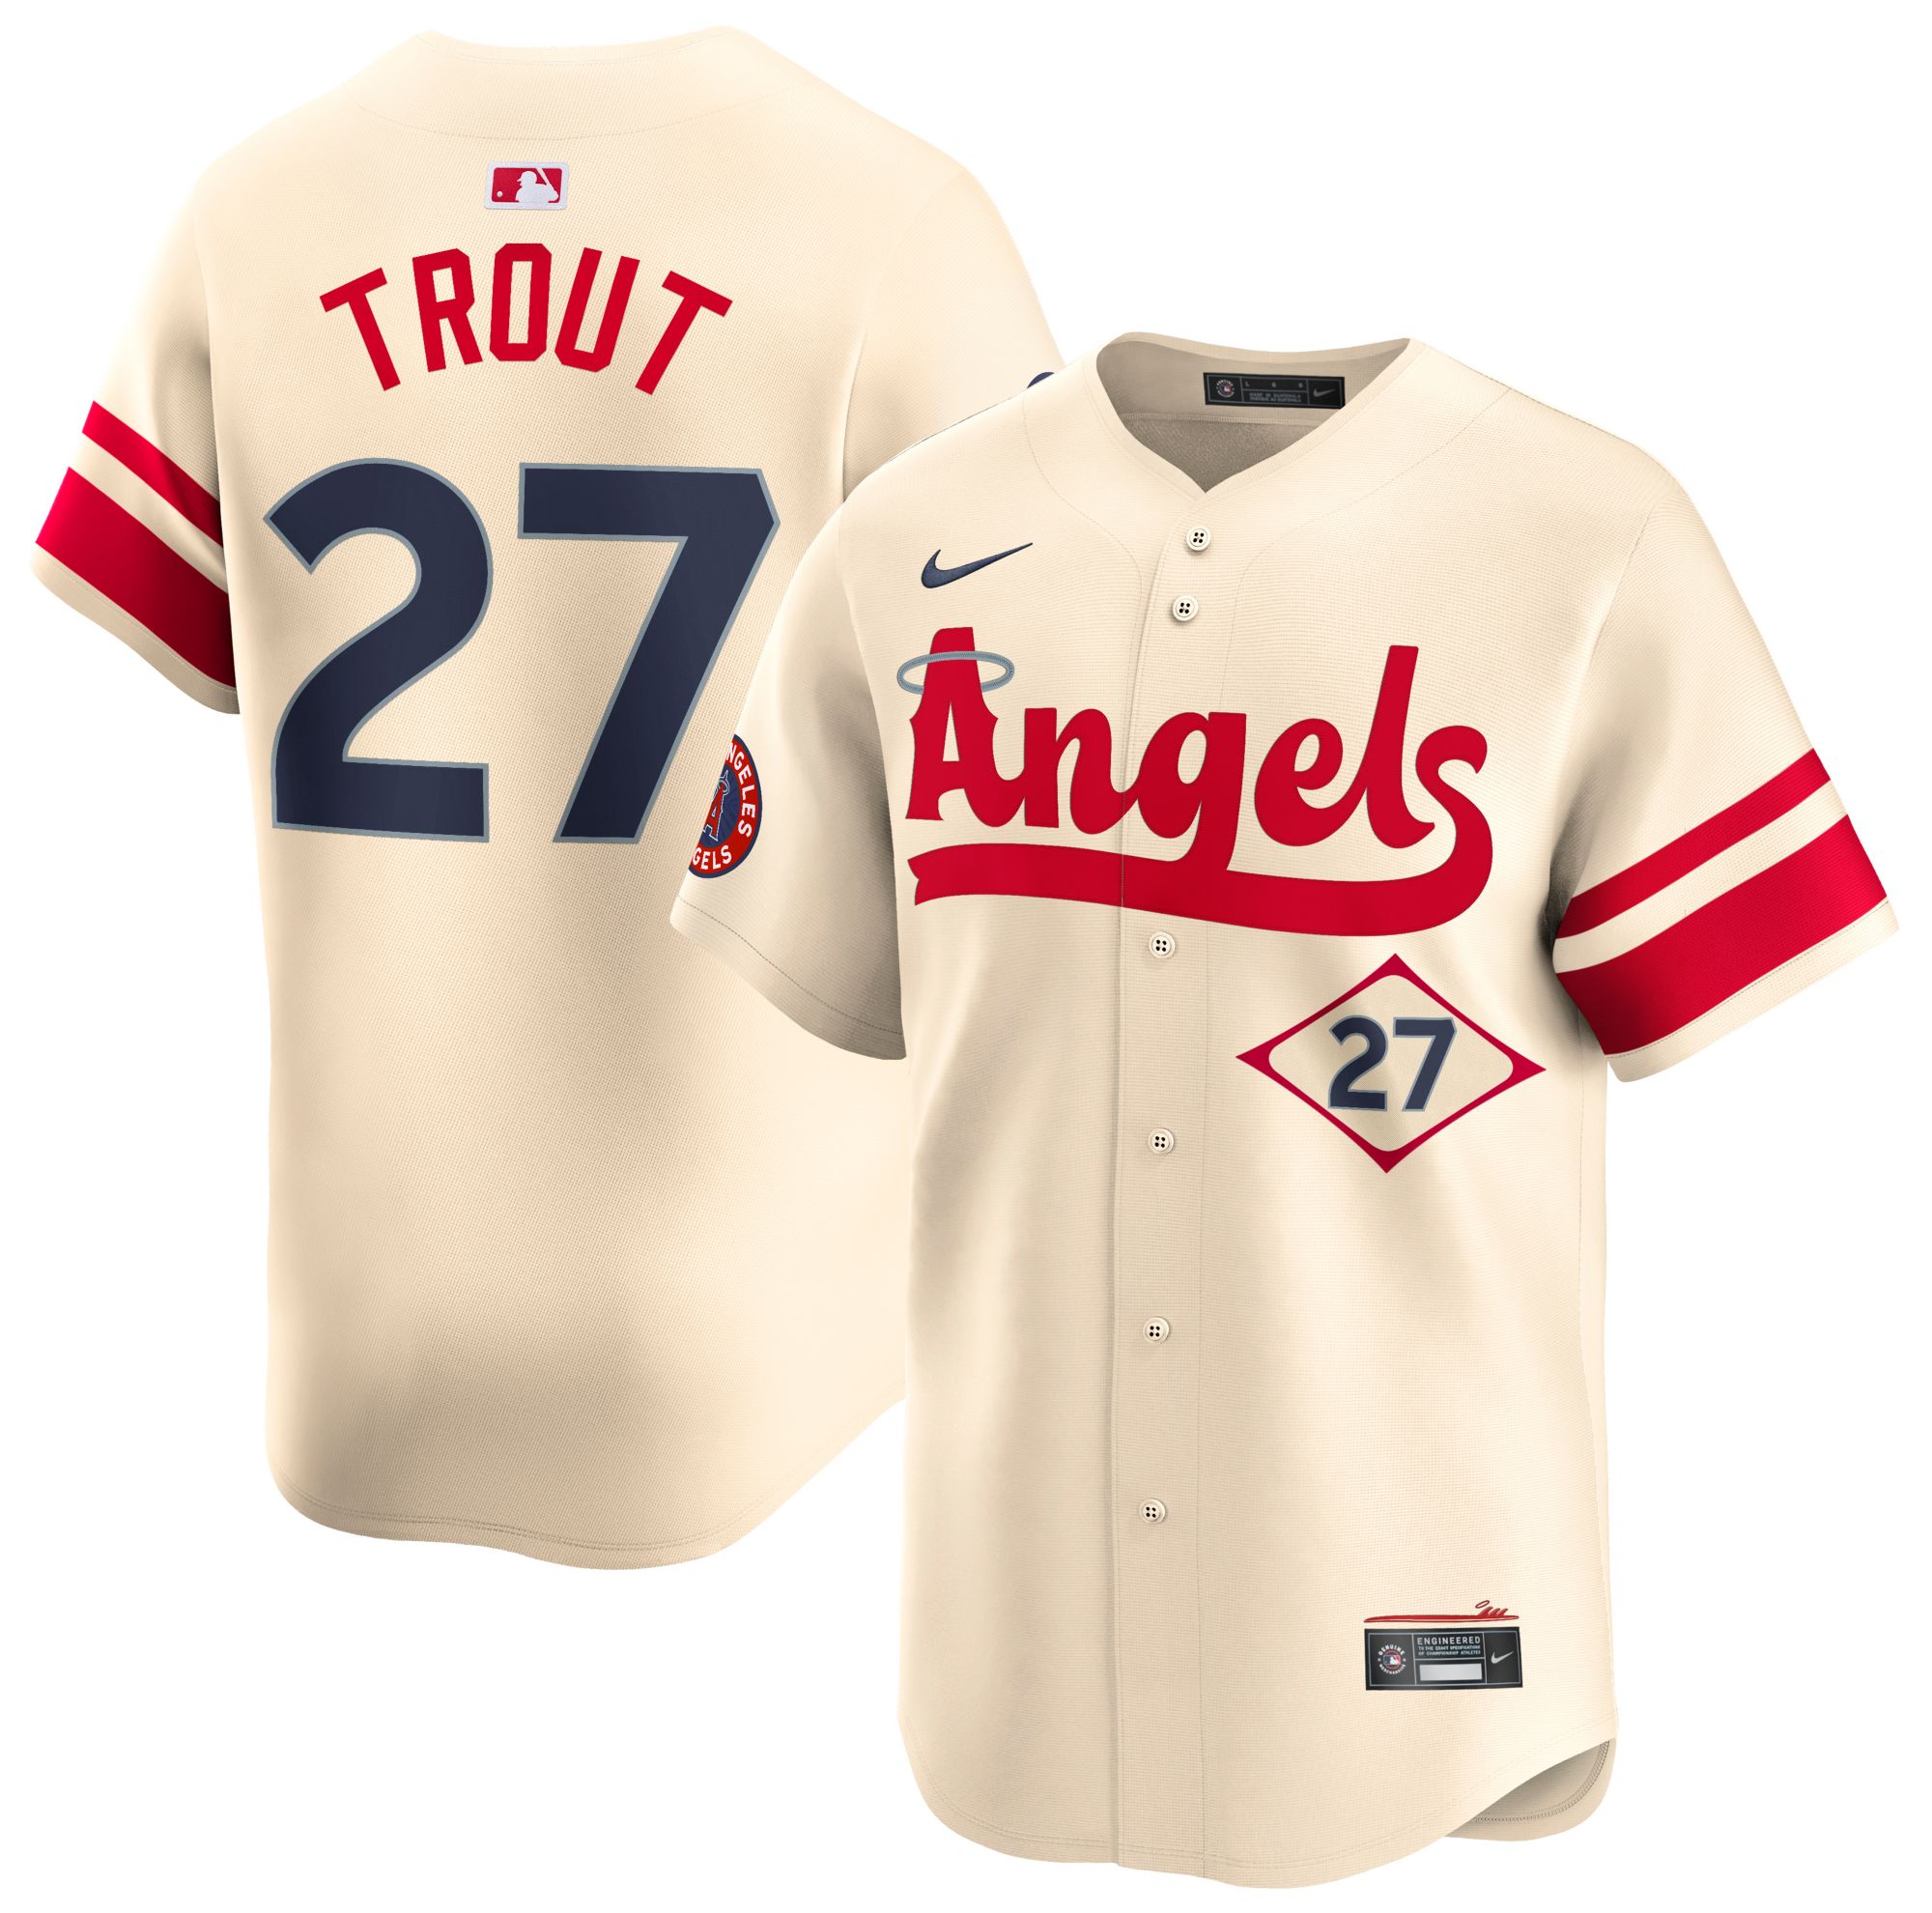 angels uniforms today